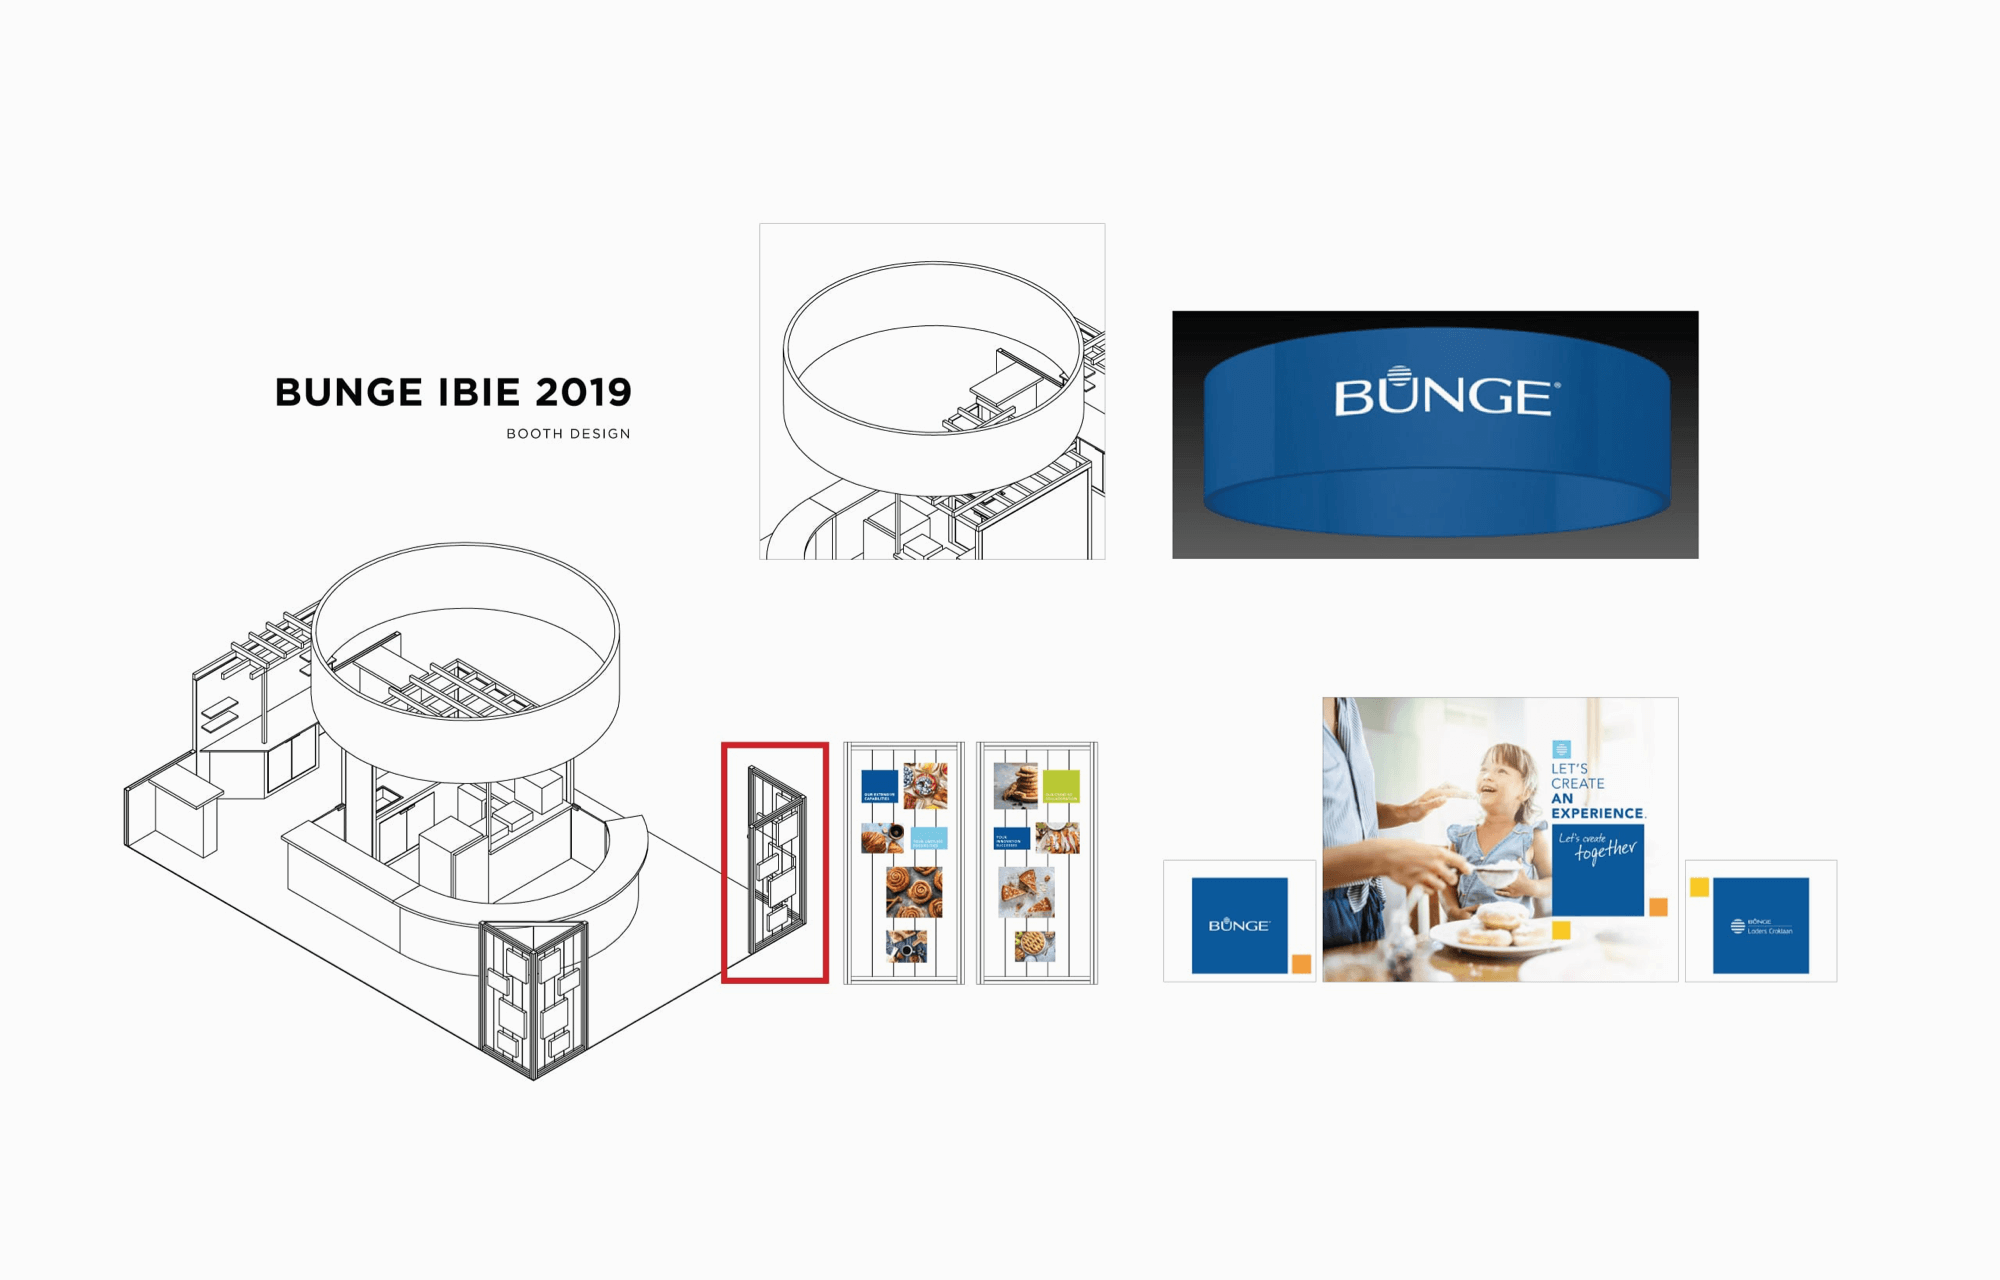 Bunge IBIE trade show booth design